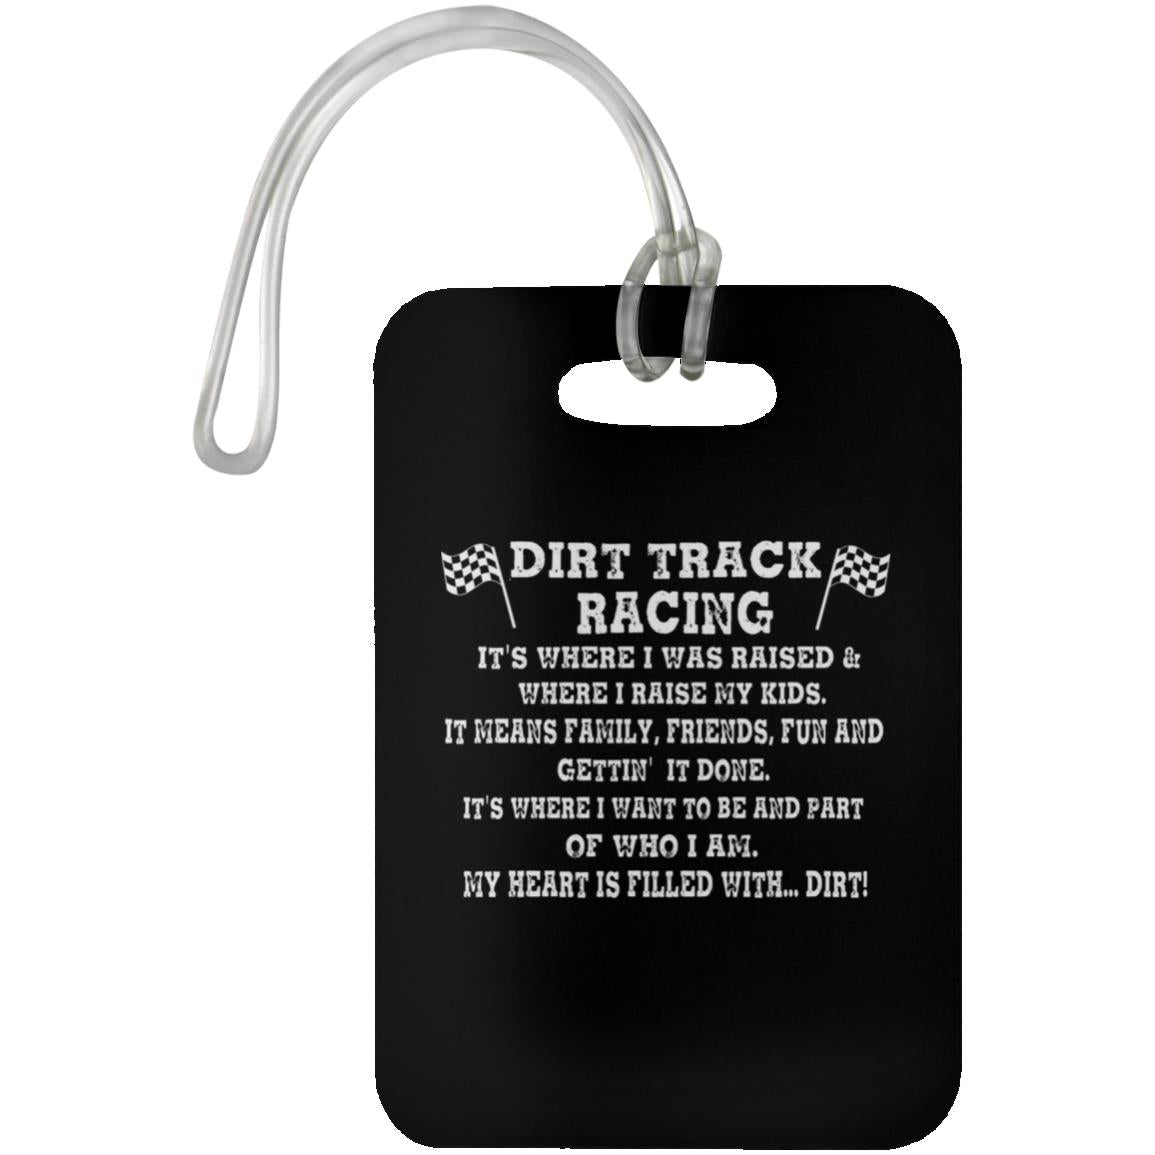 Dirt Track Racing It's Where I Was Raised Luggage Bag Tag